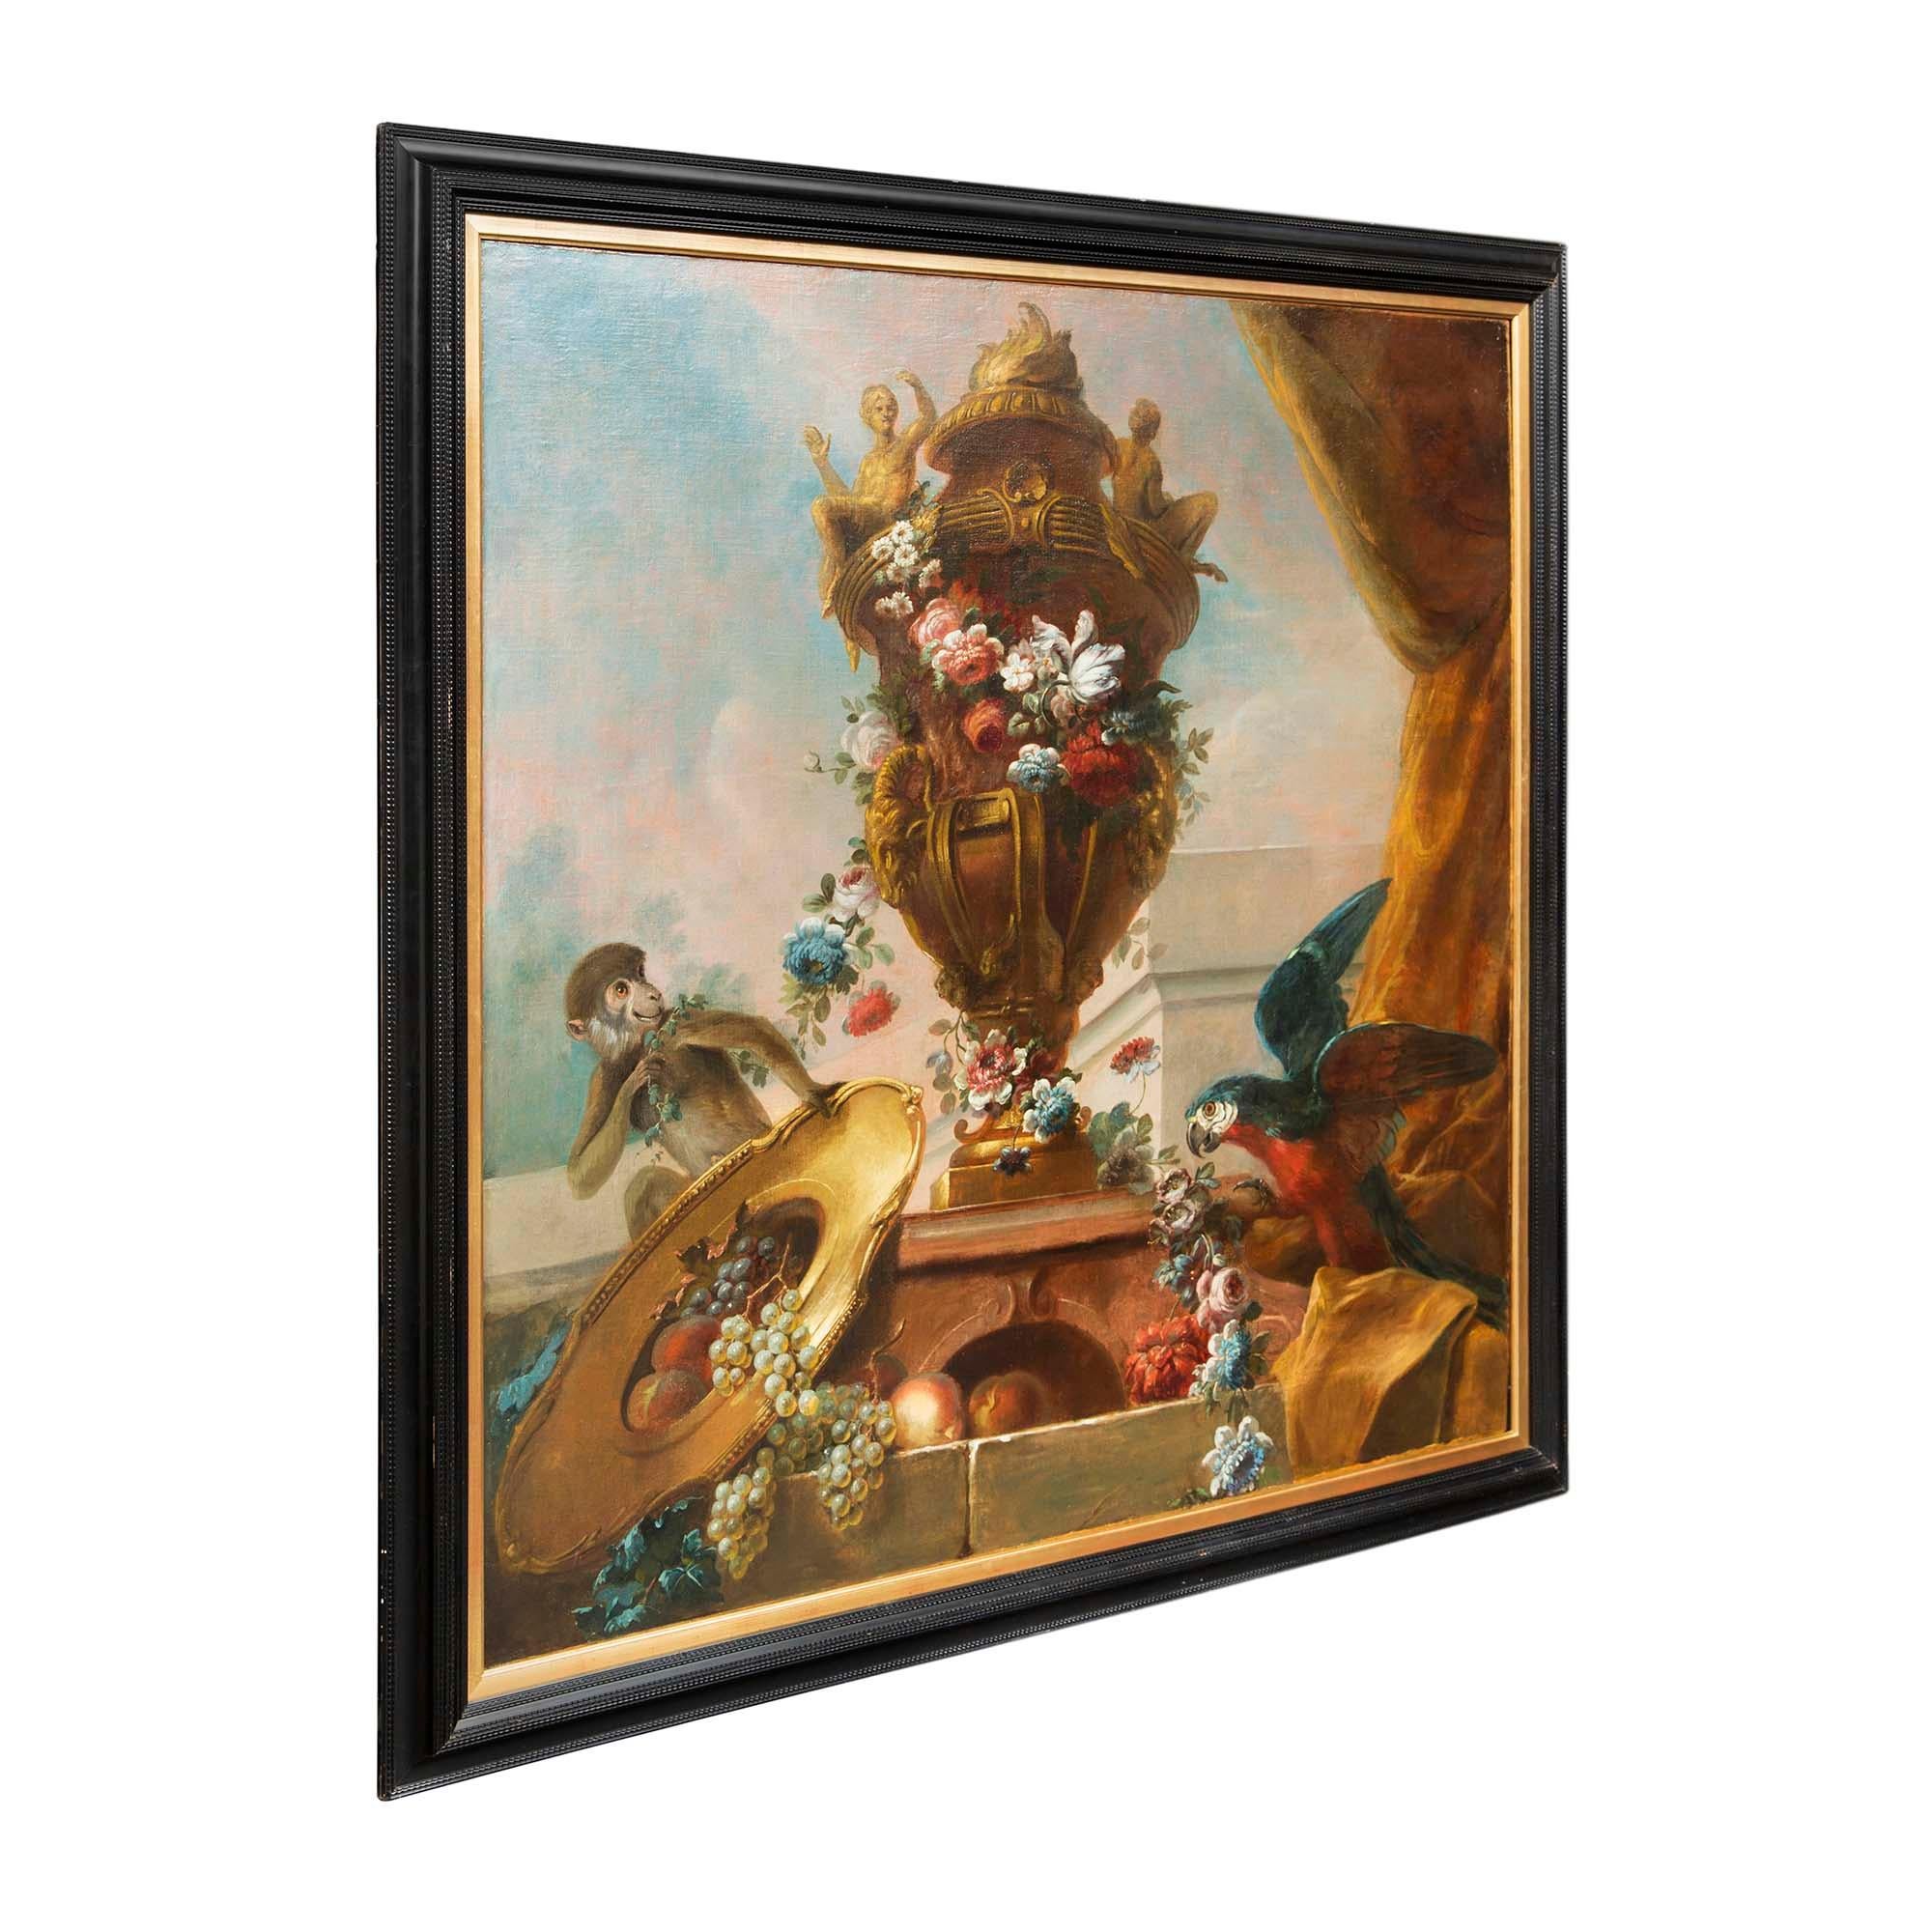 A striking Continental 19th century still life painting. The charming painting depicts a central urn with eternal flame and personages seated to each side and draped in beautiful floral garlands. At the base is a parrot amidst flowers and a monkey